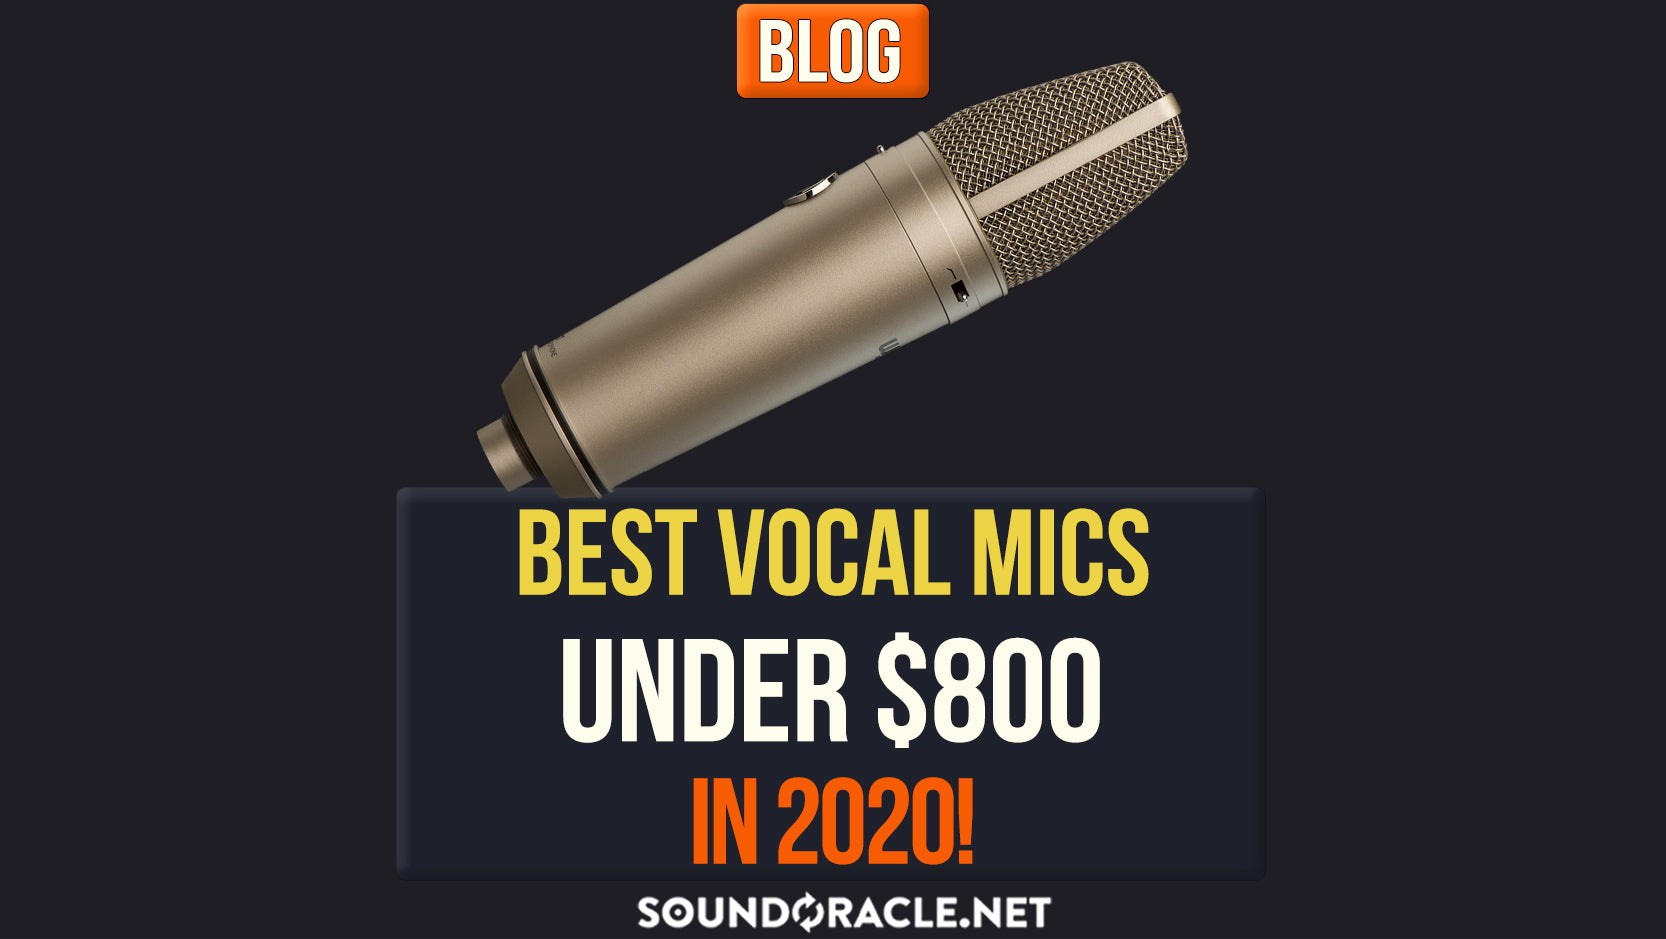 Best Vocal Mics For Under $800 in 2020!